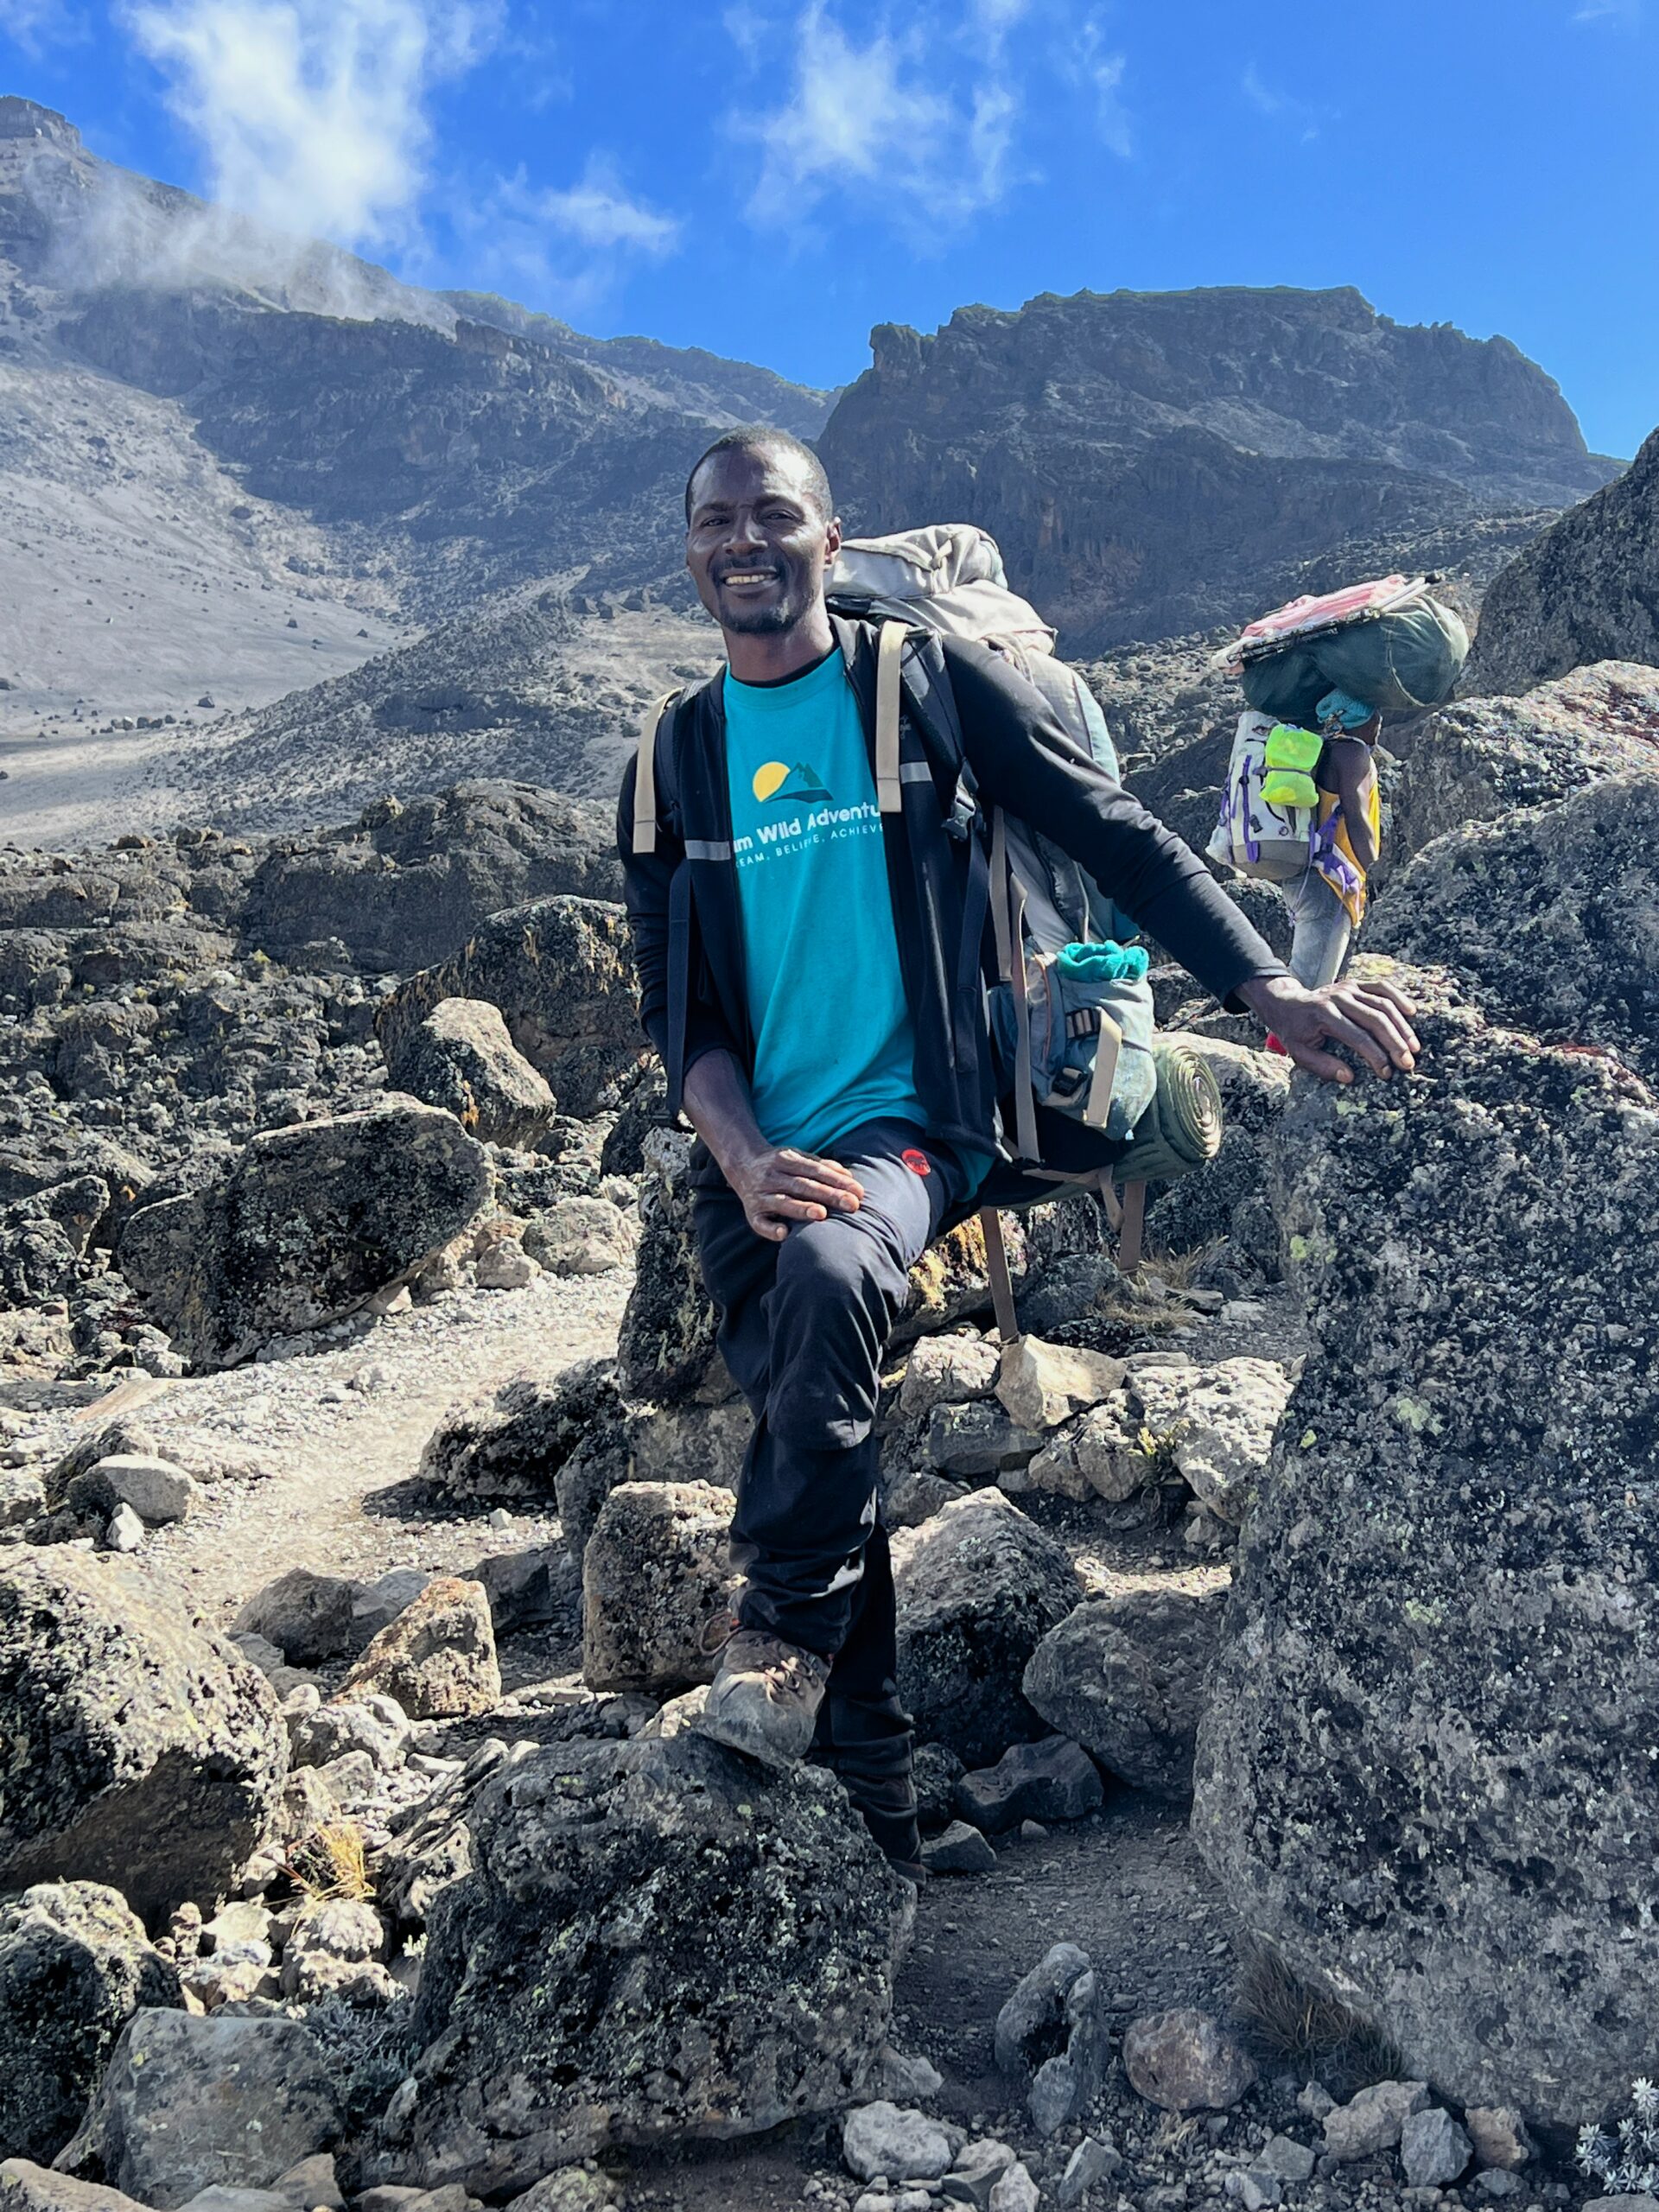 A Kilimanjaro guide sitting on rocks with a backpack